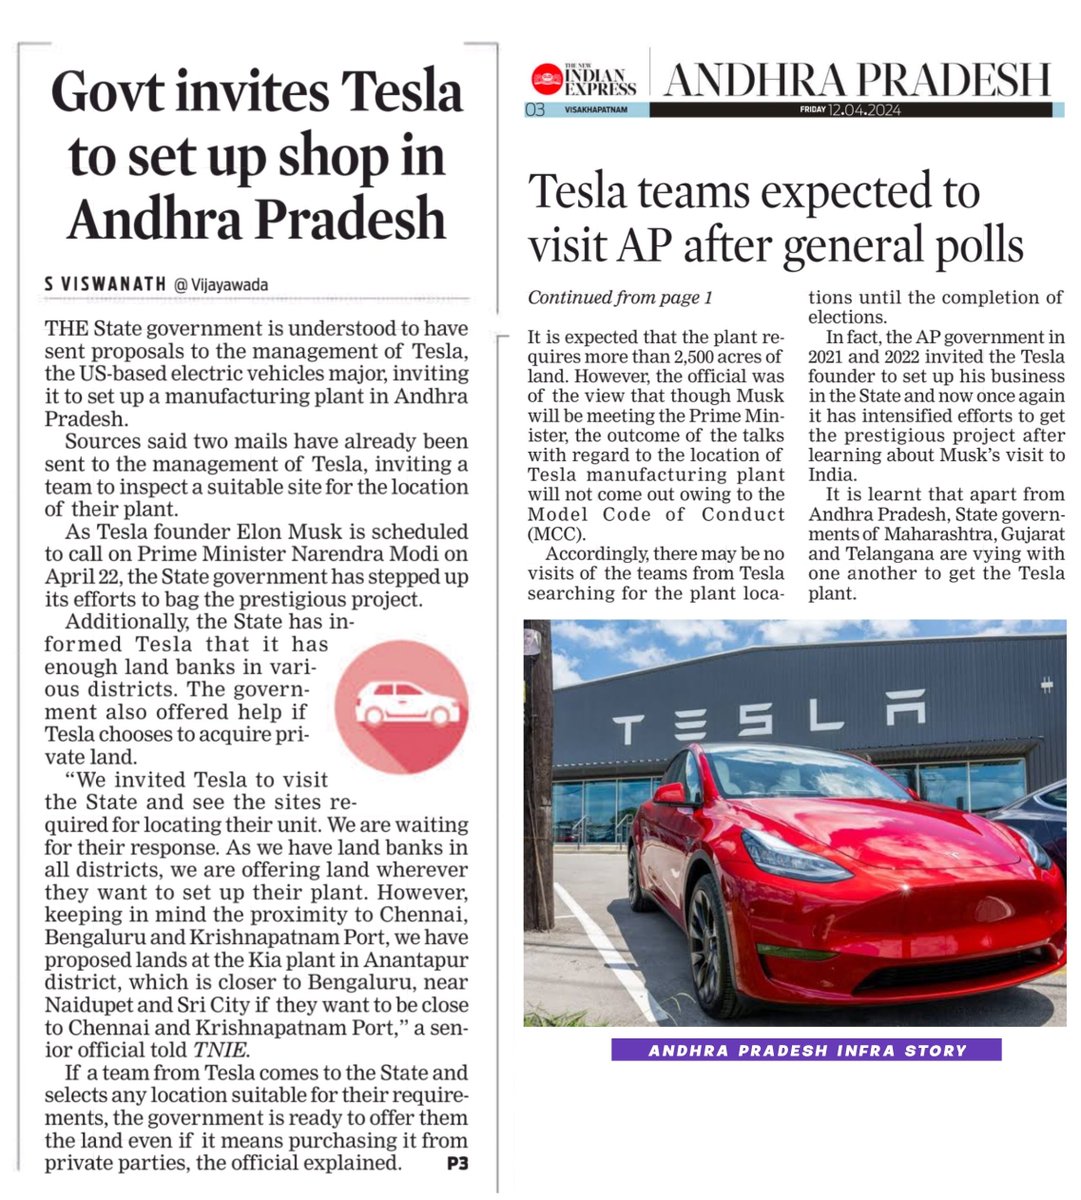 🔸Andhra Pradesh Govt invites Tesla to set up EV Cars Manufacturing Plant In State 🚘 🔹AP Govt invited Tesla to visit the State and see the sites required for locating their unit 🔹The State Govt has informed Tesla that it has enough land banks in various districts. The…